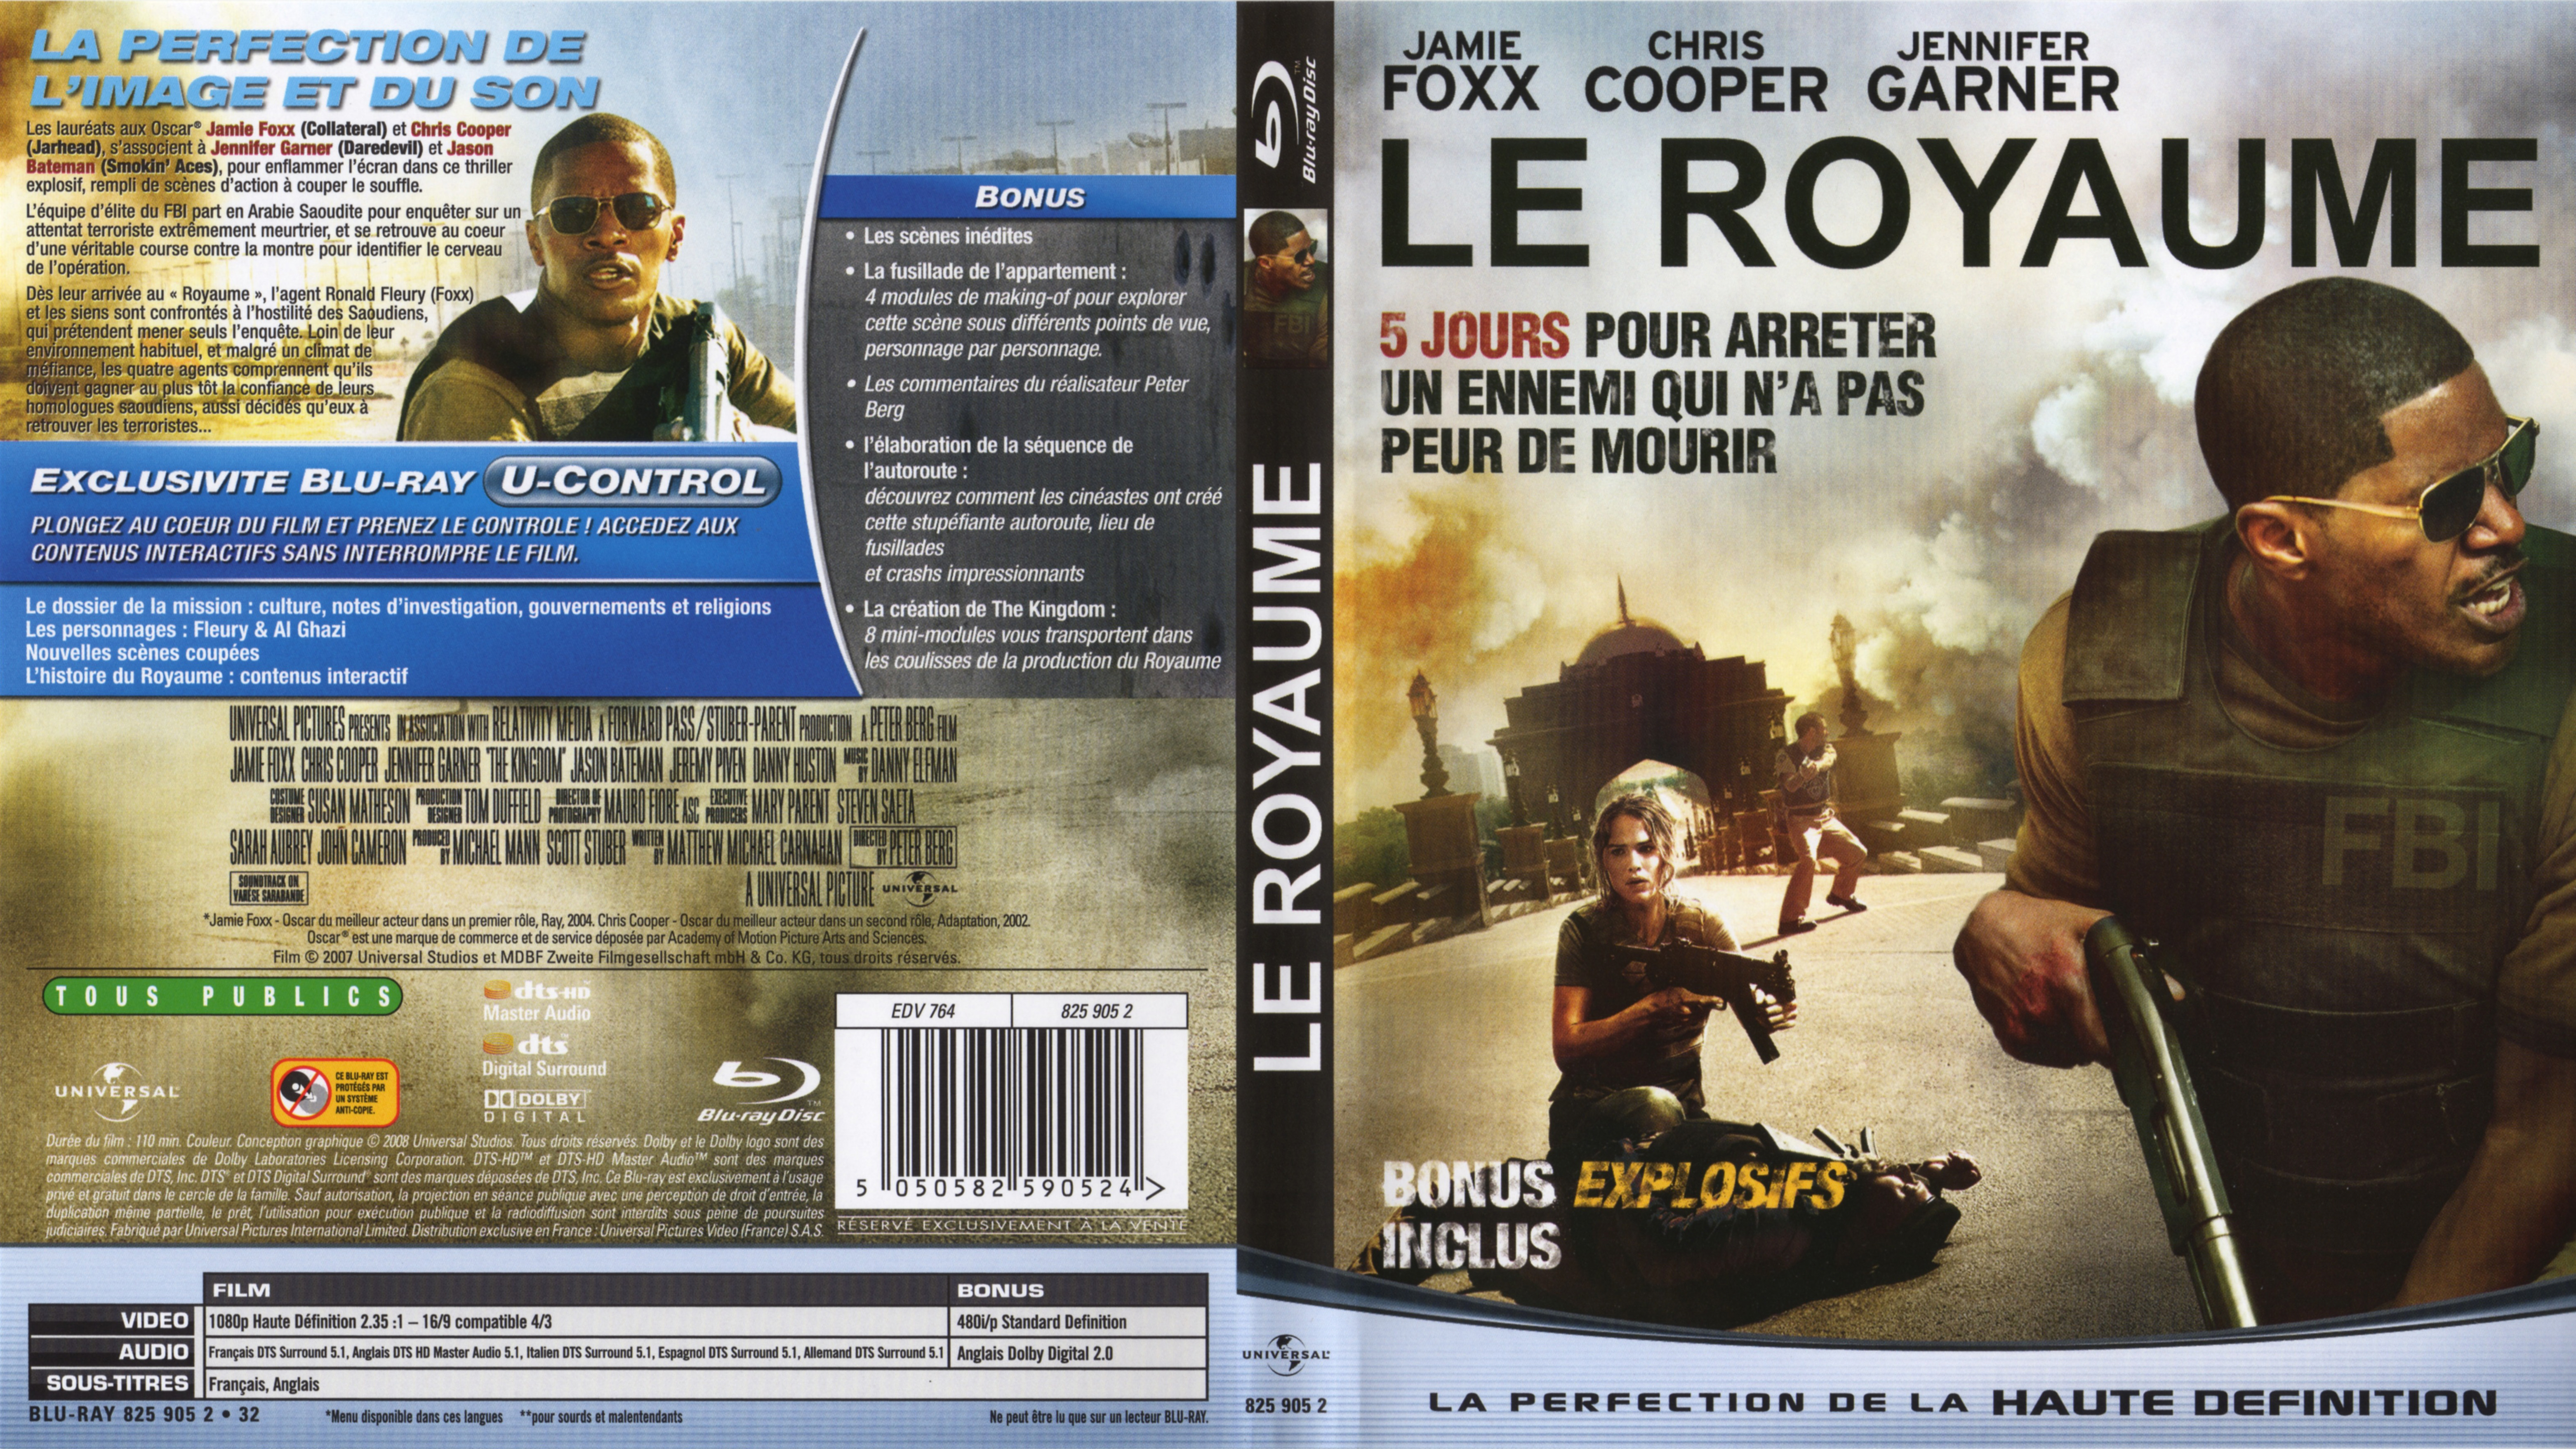 Jaquette DVD Le royaume (BLU-RAY)